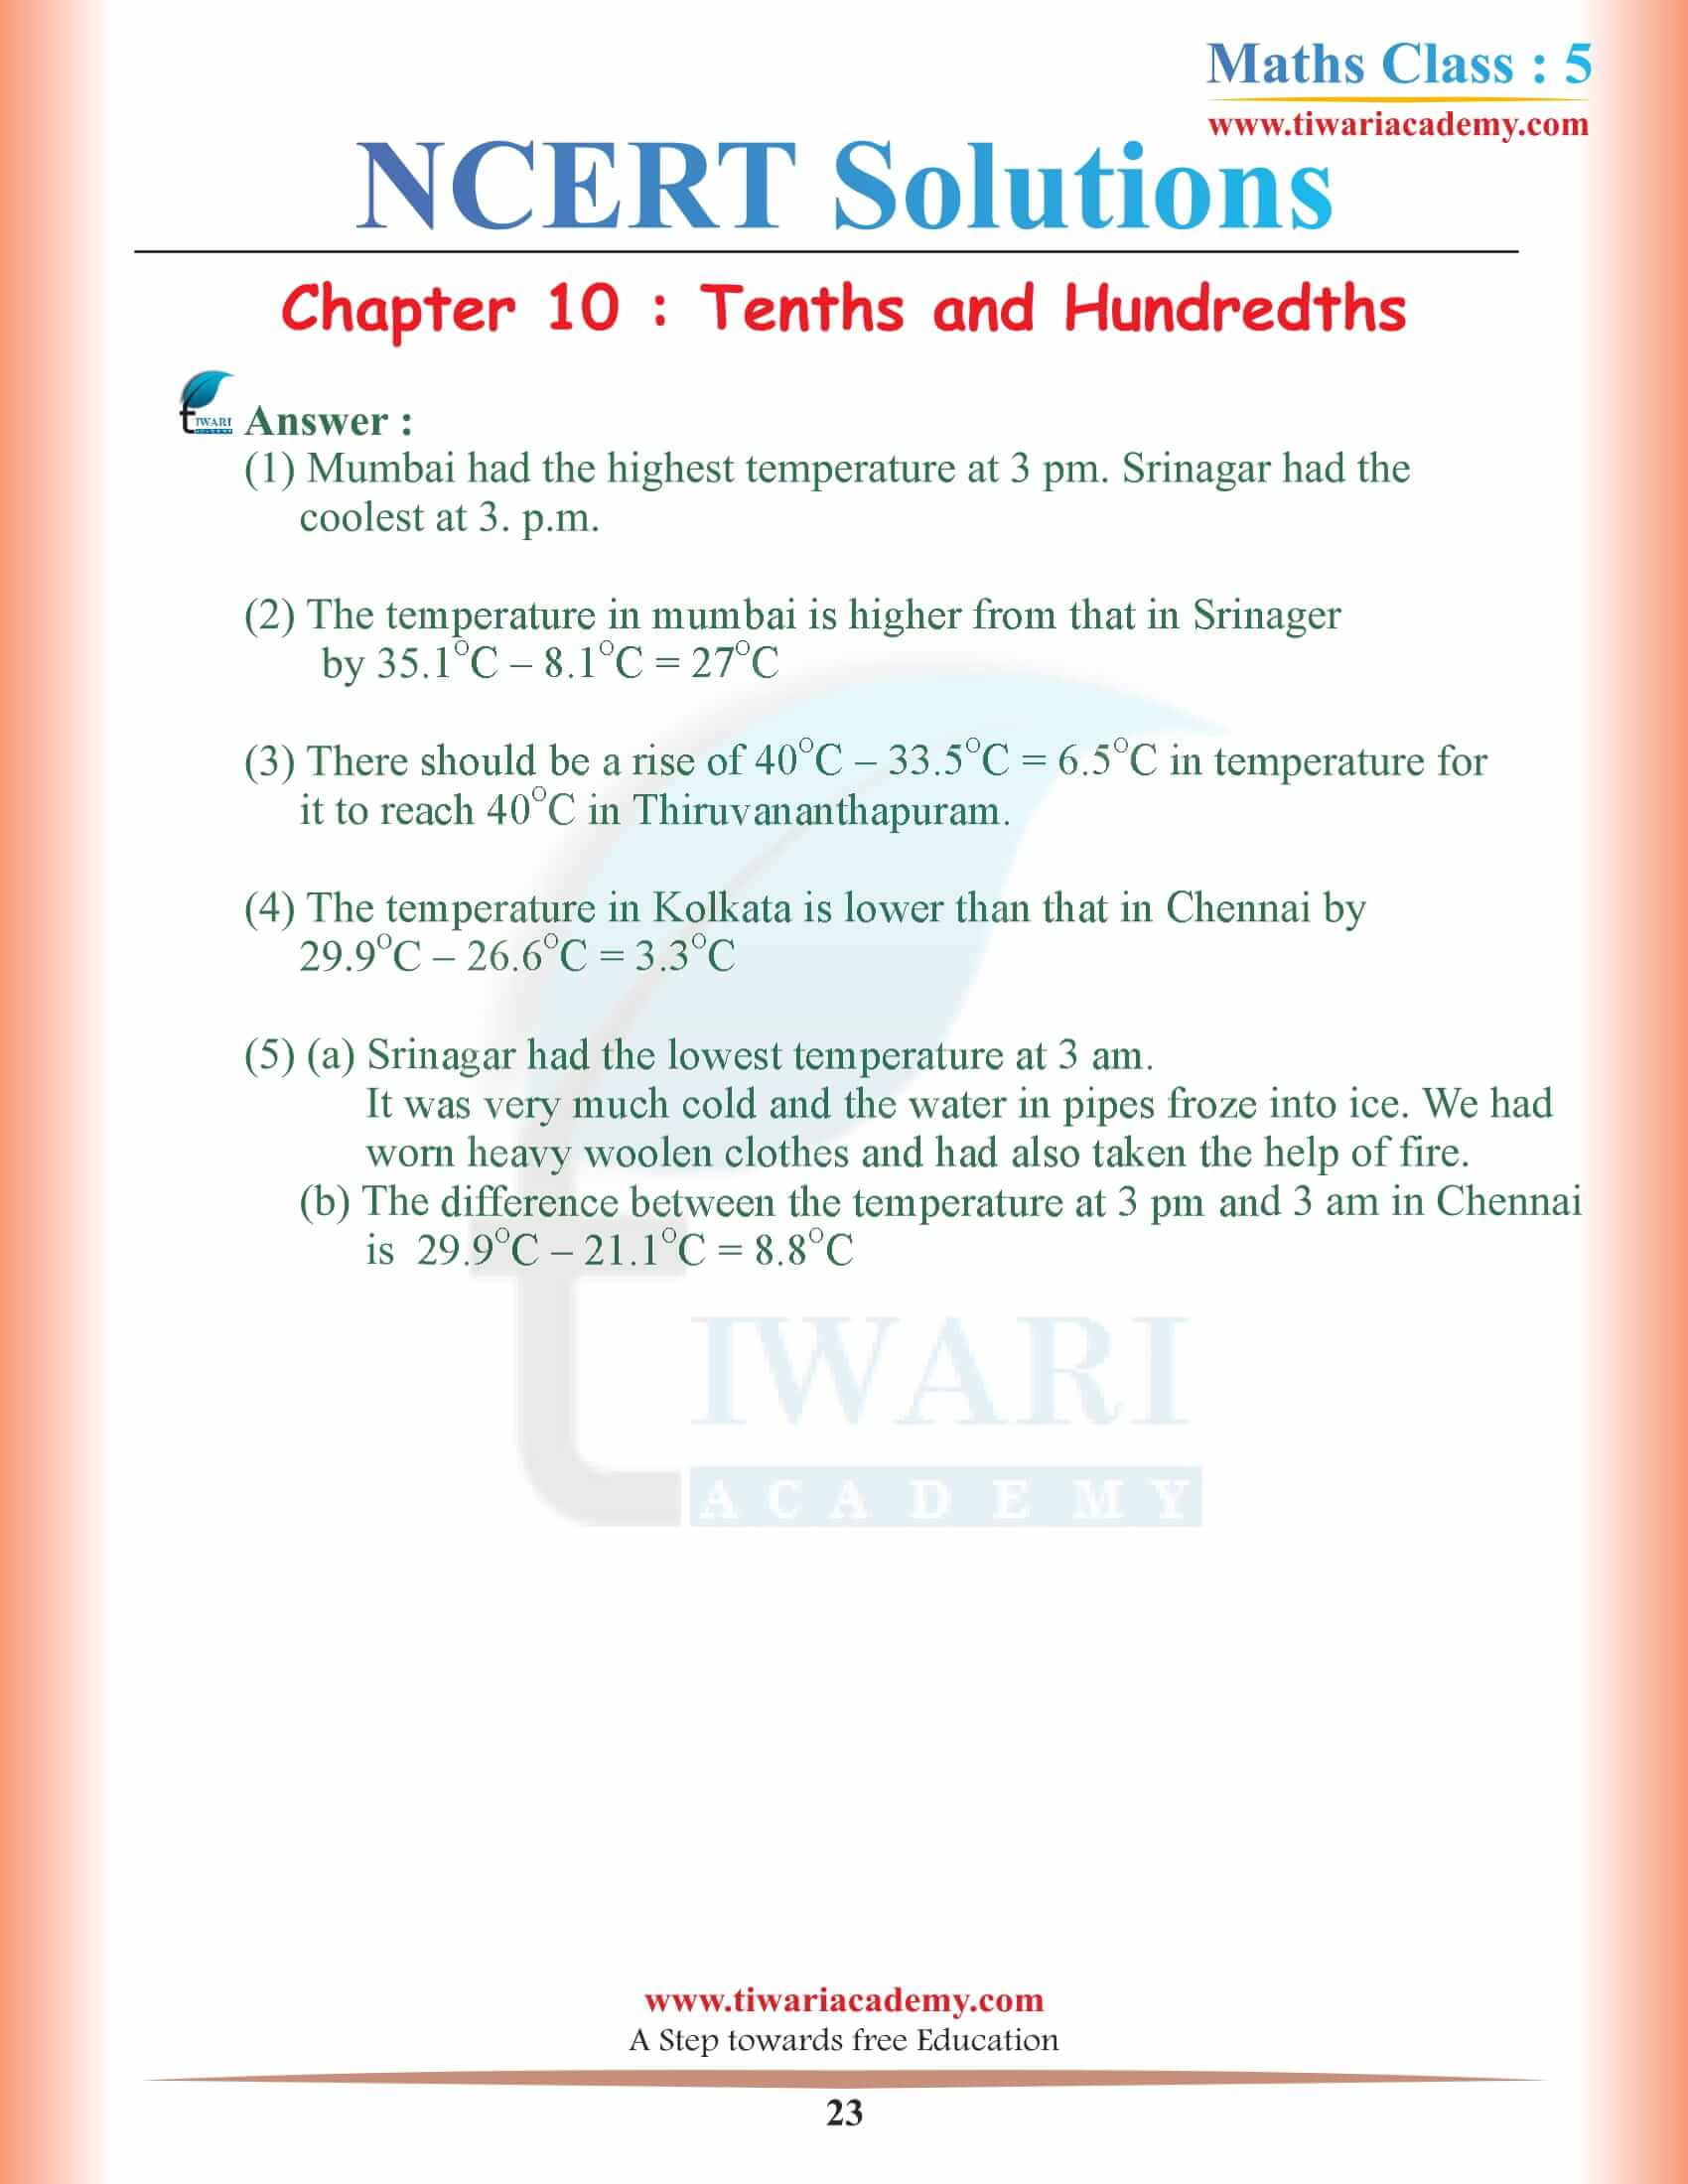 5th Maths NCERT Chapter 10 Sols